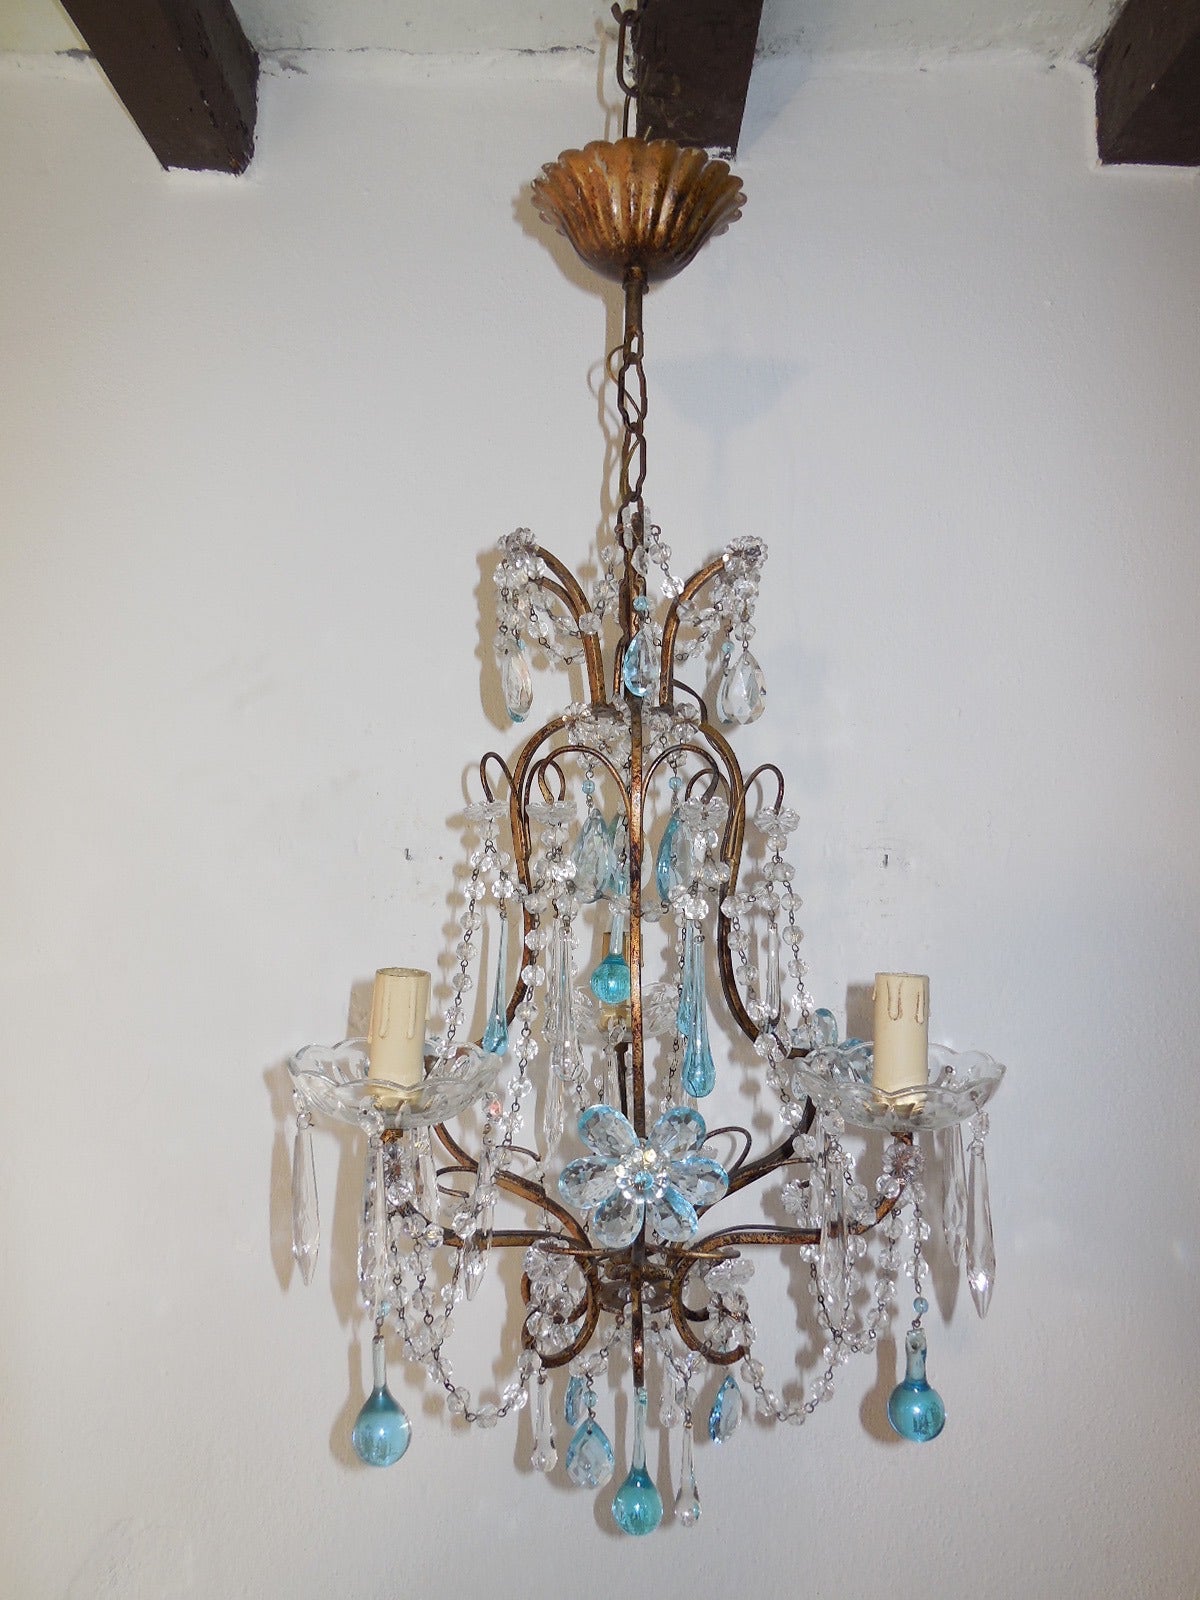 Housing 3 lights, sitting in crystal bobeches dripping with crystal spears.  Gilt metal body with swags throughout.  Adorning aqua prisms, flowers, Murano drops and beads.  Adding another 8”of original chain and canopy.  Re-wired and ready to hang. 